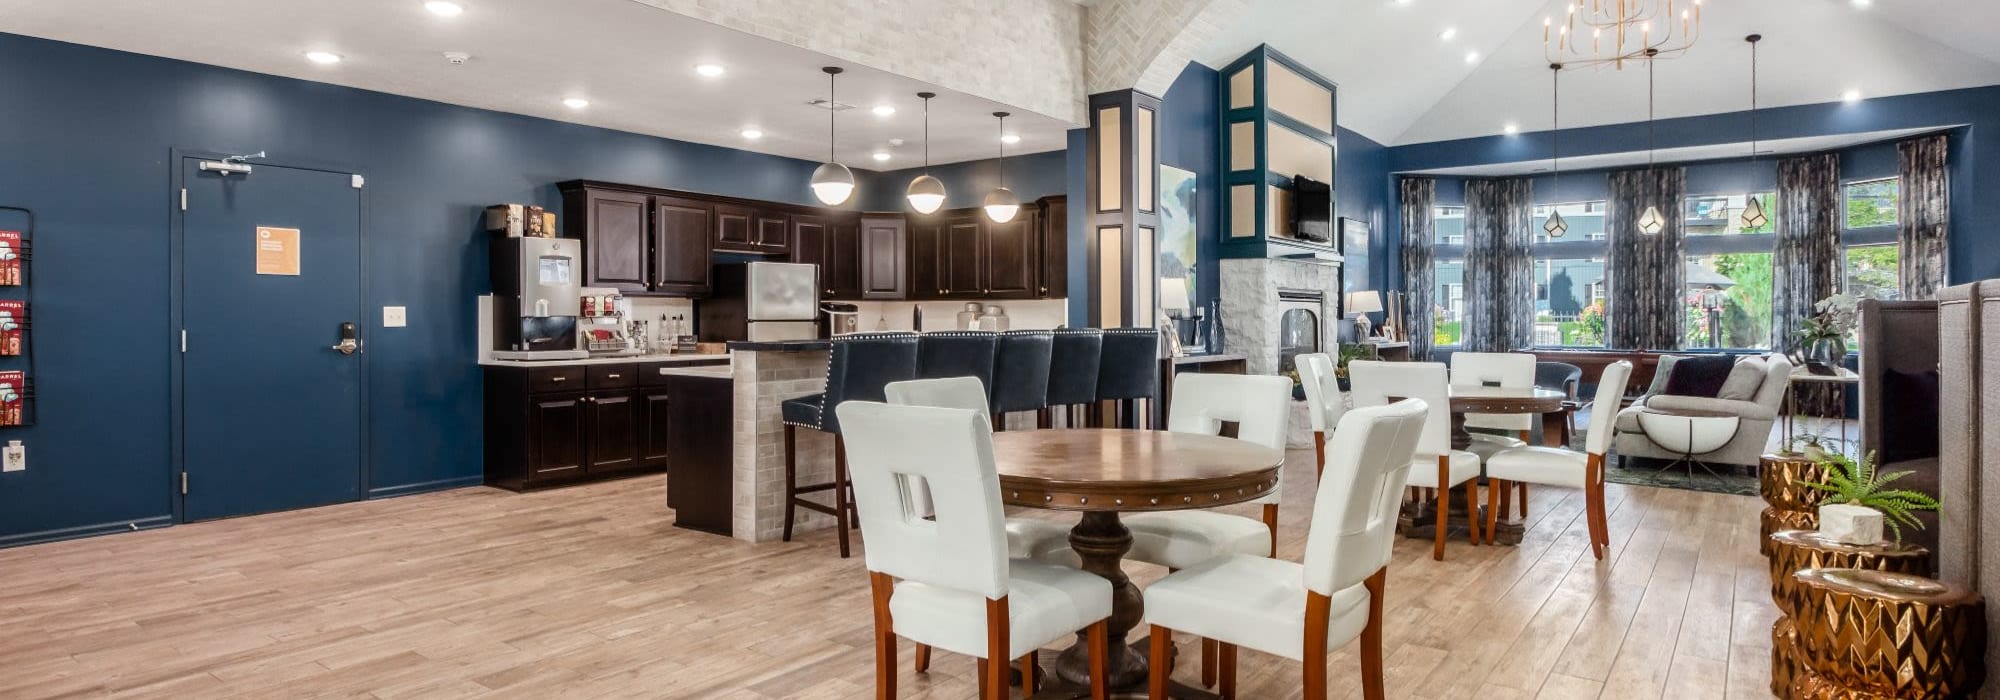 Schedule a Tour at Polaris Crossing in Westerville, Ohio